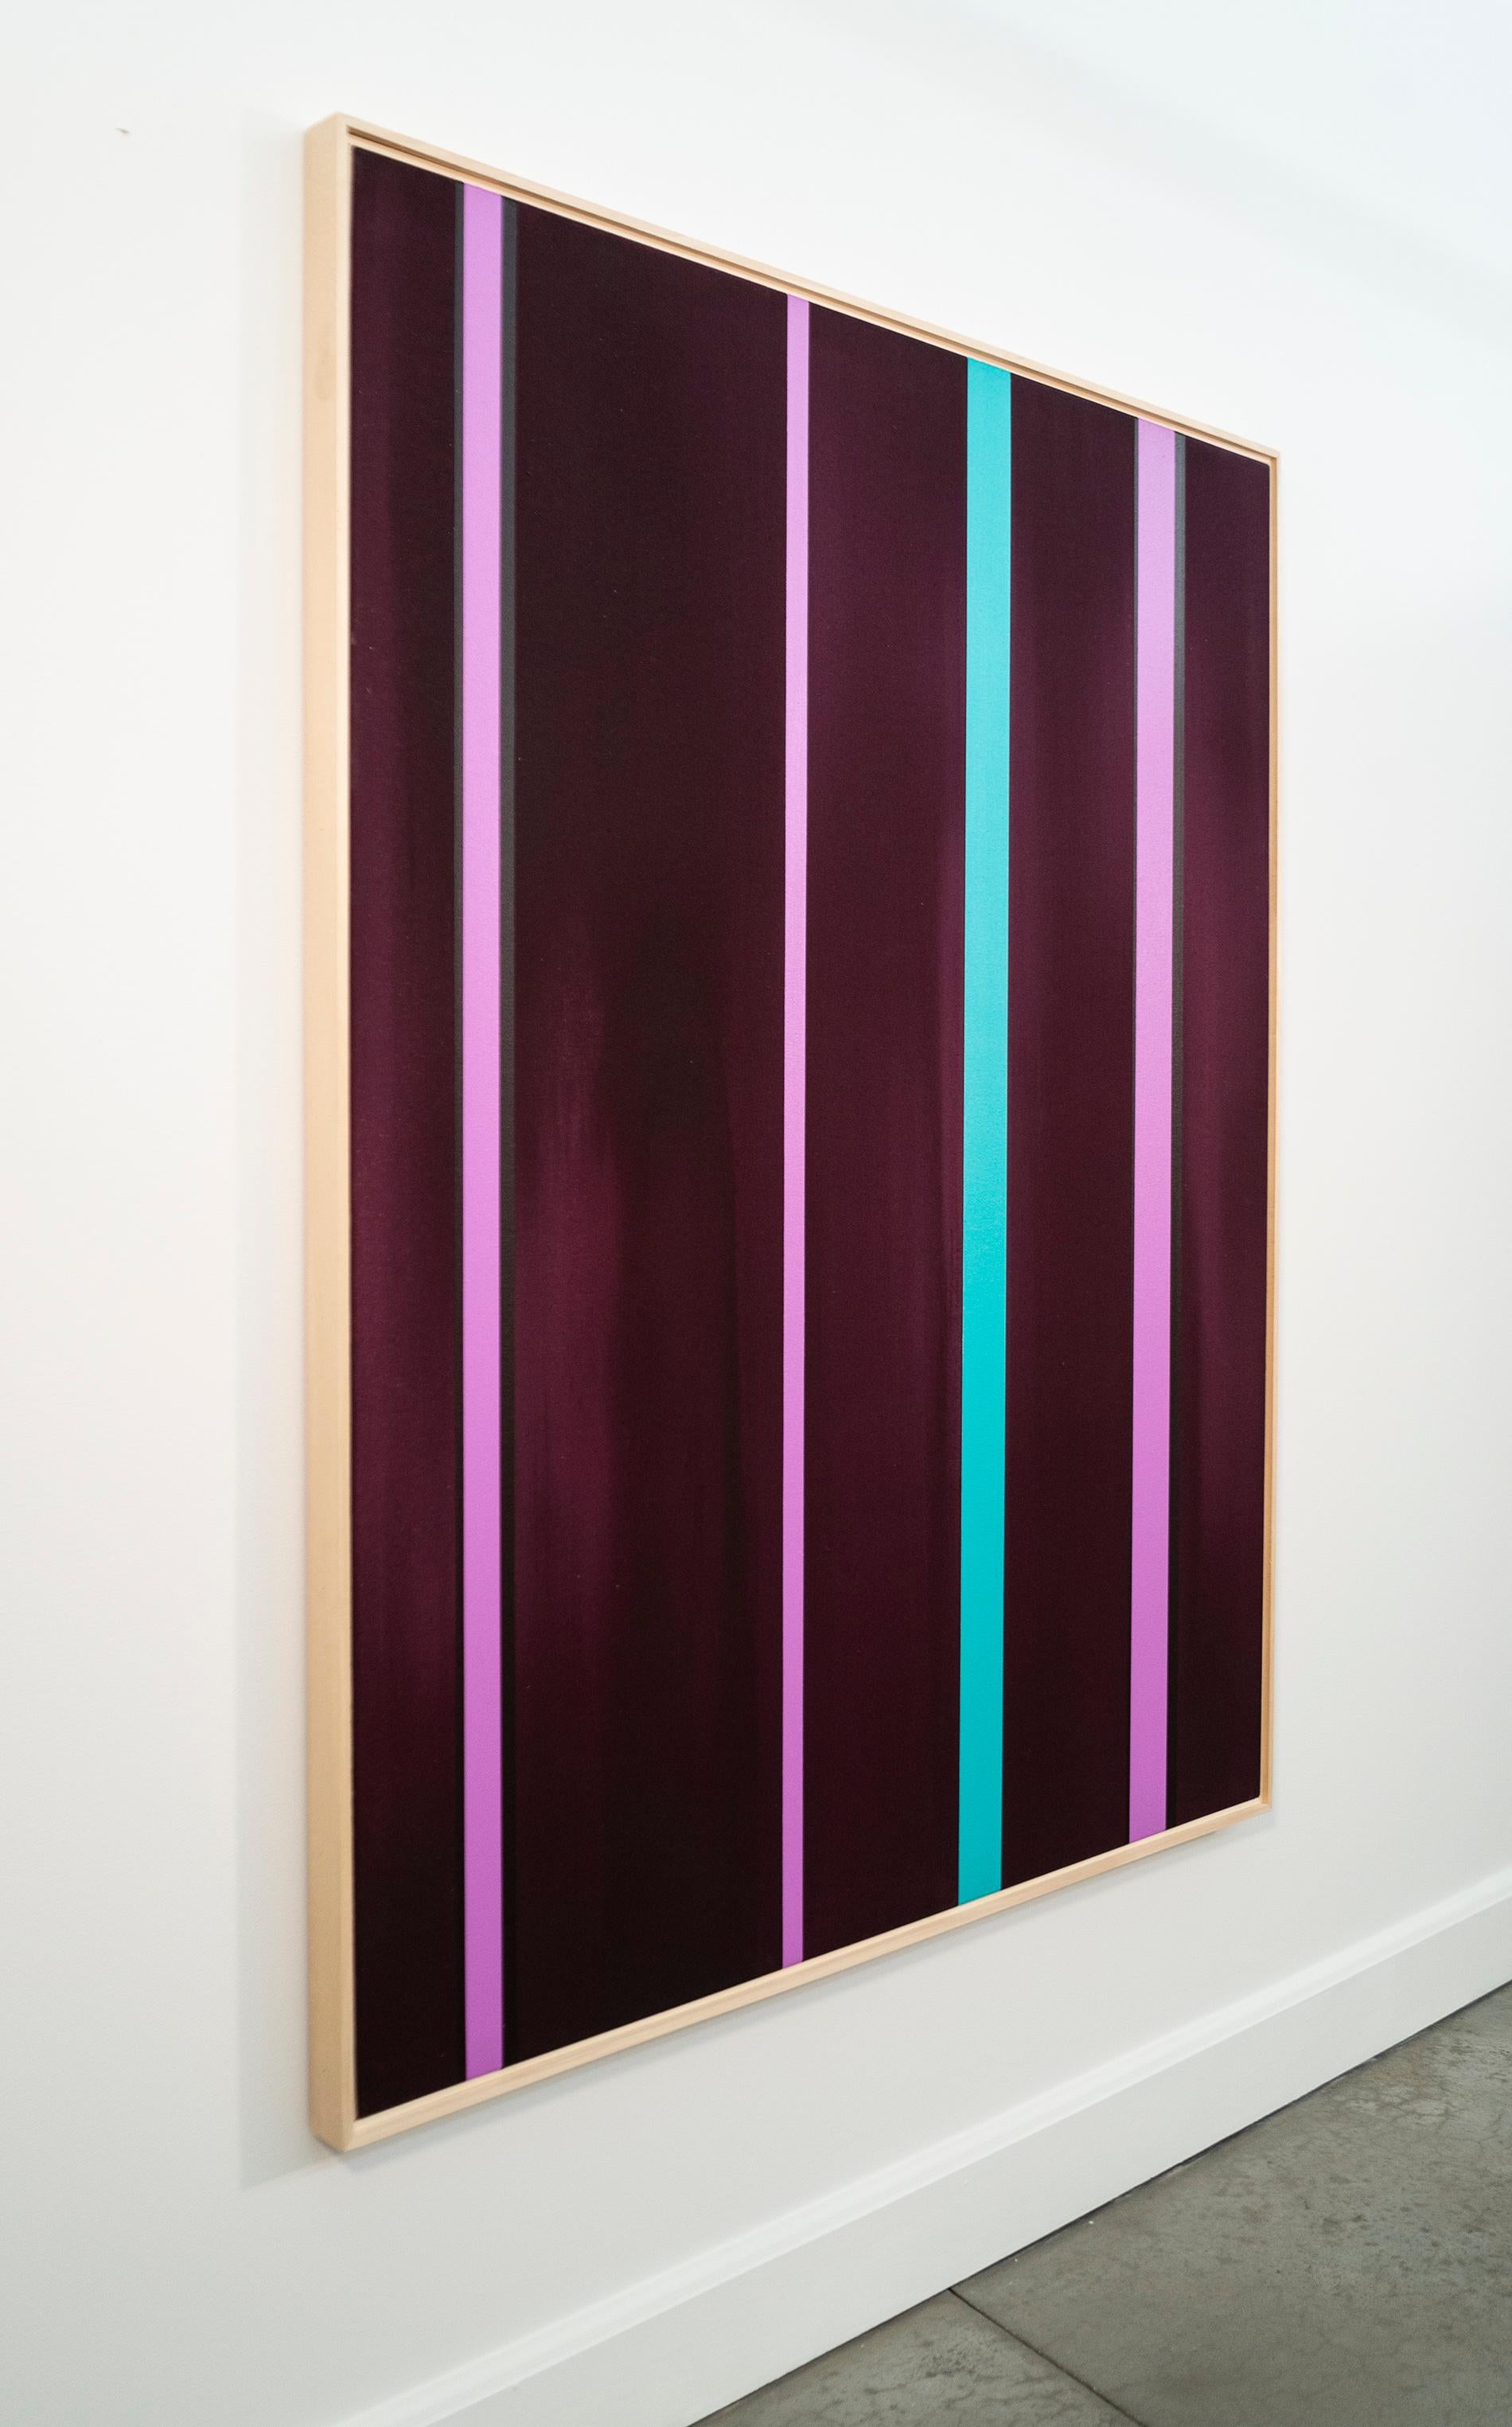 In this bold new abstract painting by Milly Ristvedt vertical lines of colour in various widths pop against a soft, fluid burgundy canvas. As always, the colour palette—bright pink, and turquoise is fresh and modern—a brilliant contrast to the